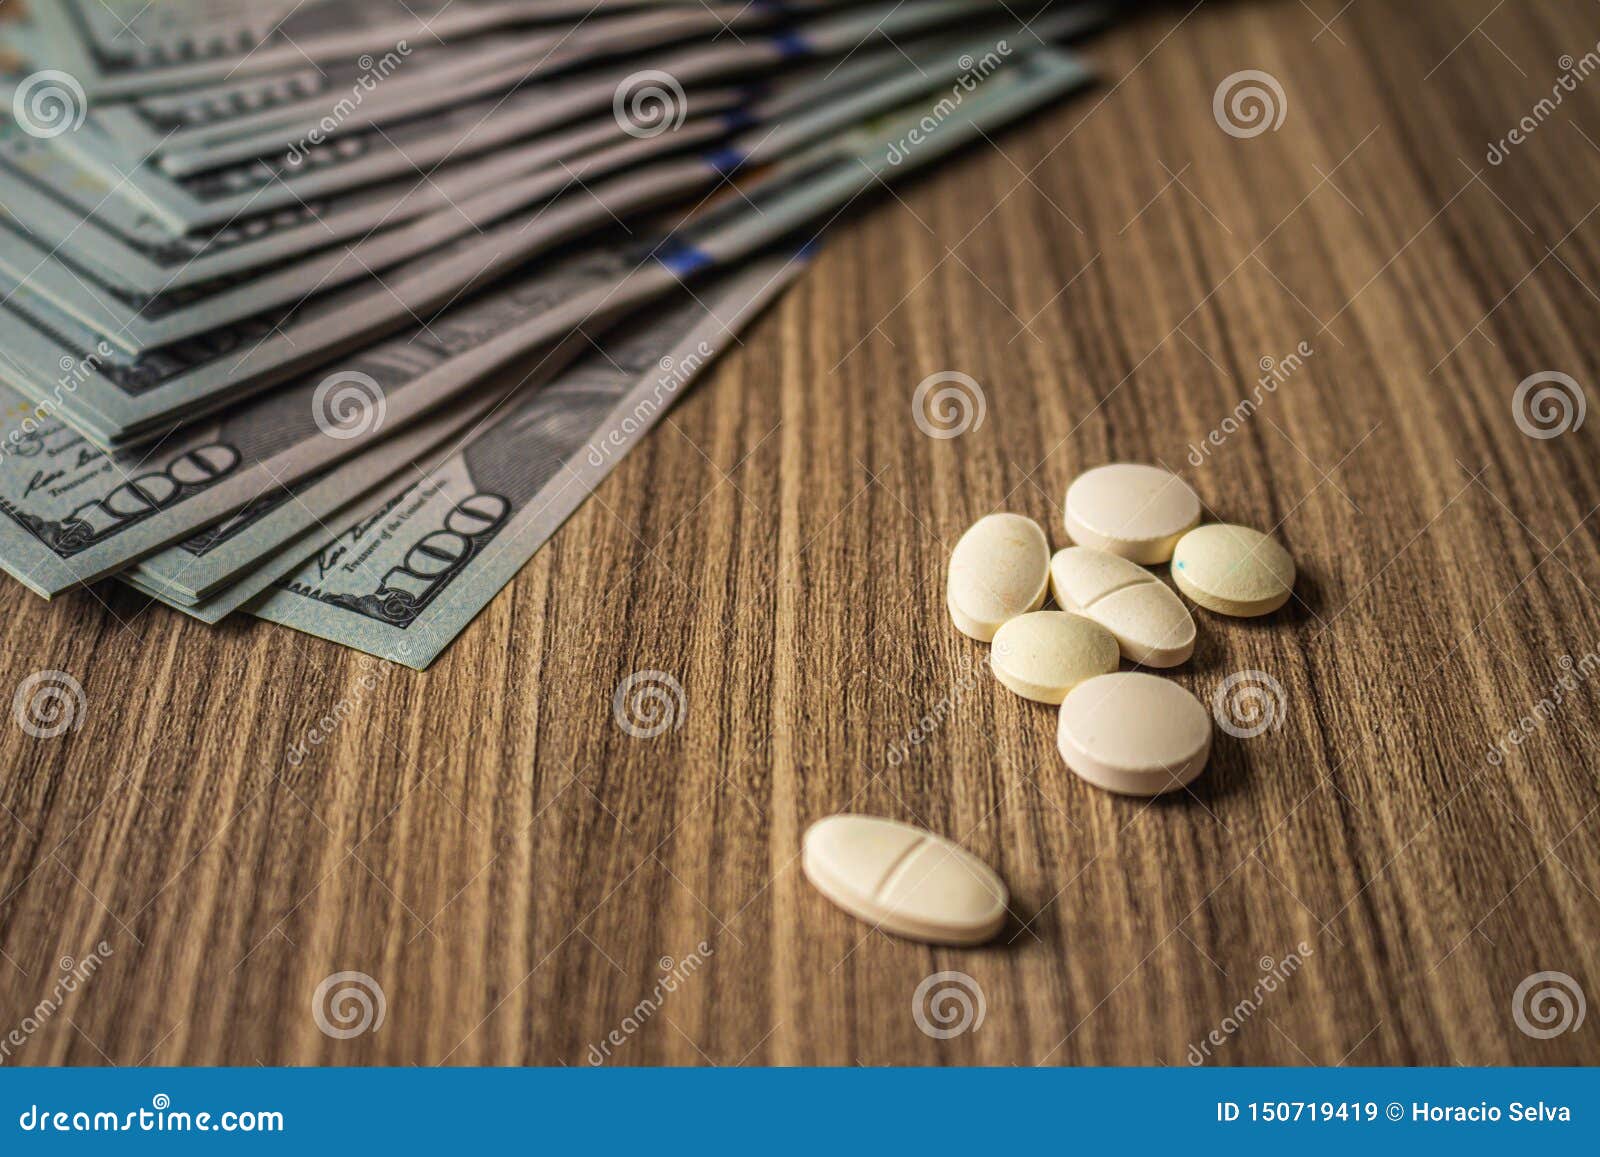 Banknotes And Medicines On A Desk Health Cost Concept Money And